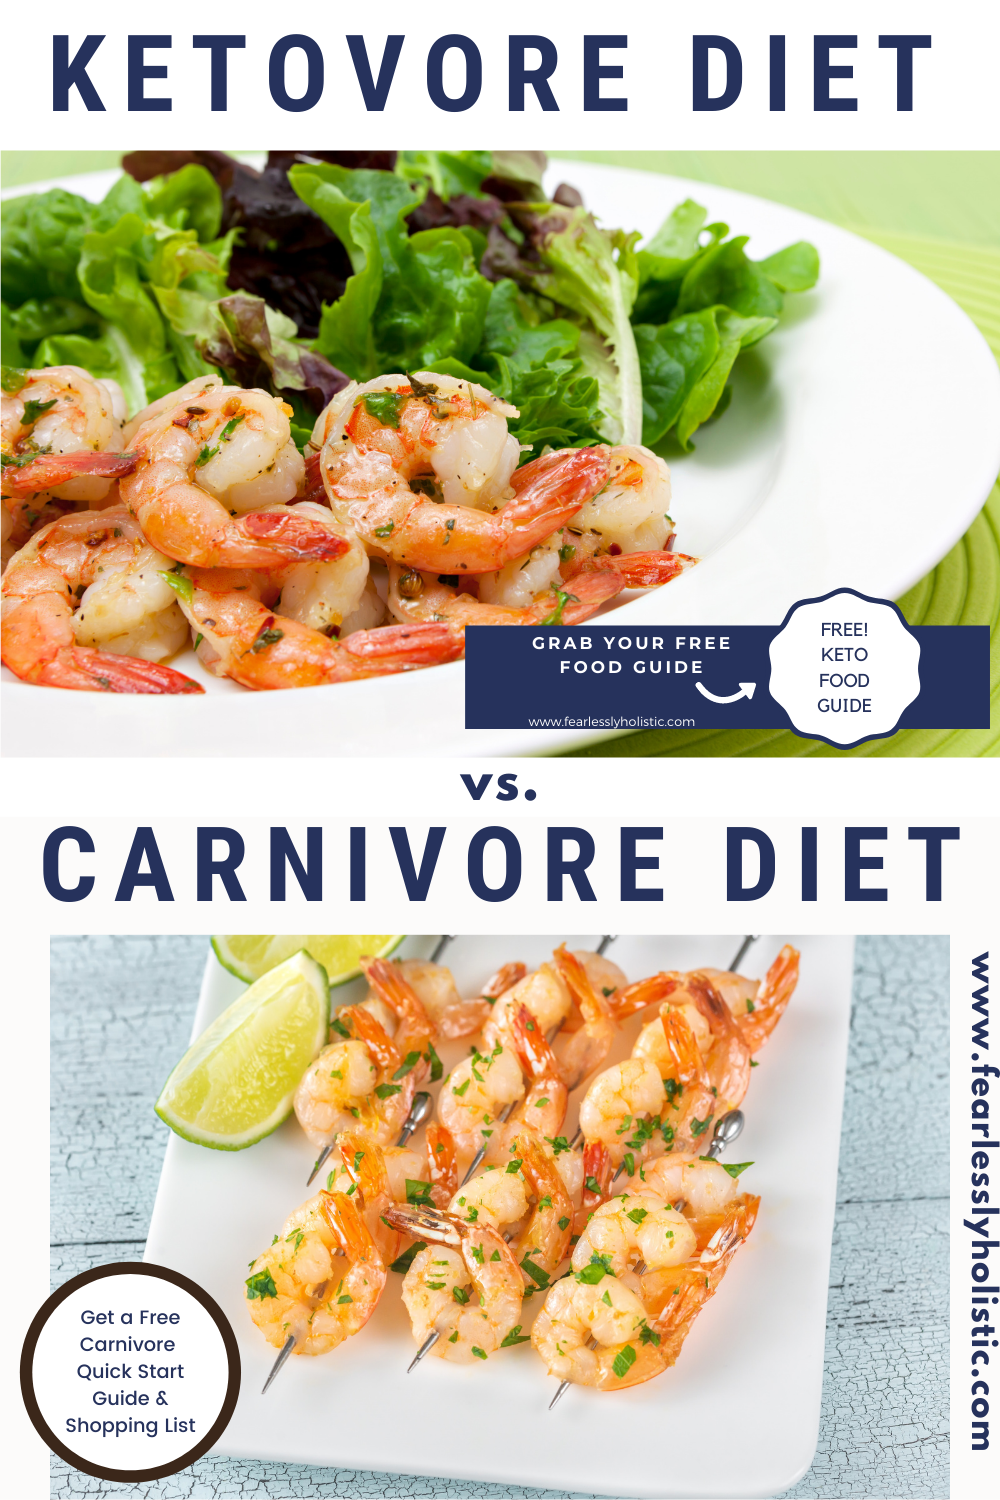 Ketovore vs Carnivore: Which Is Better for Health?